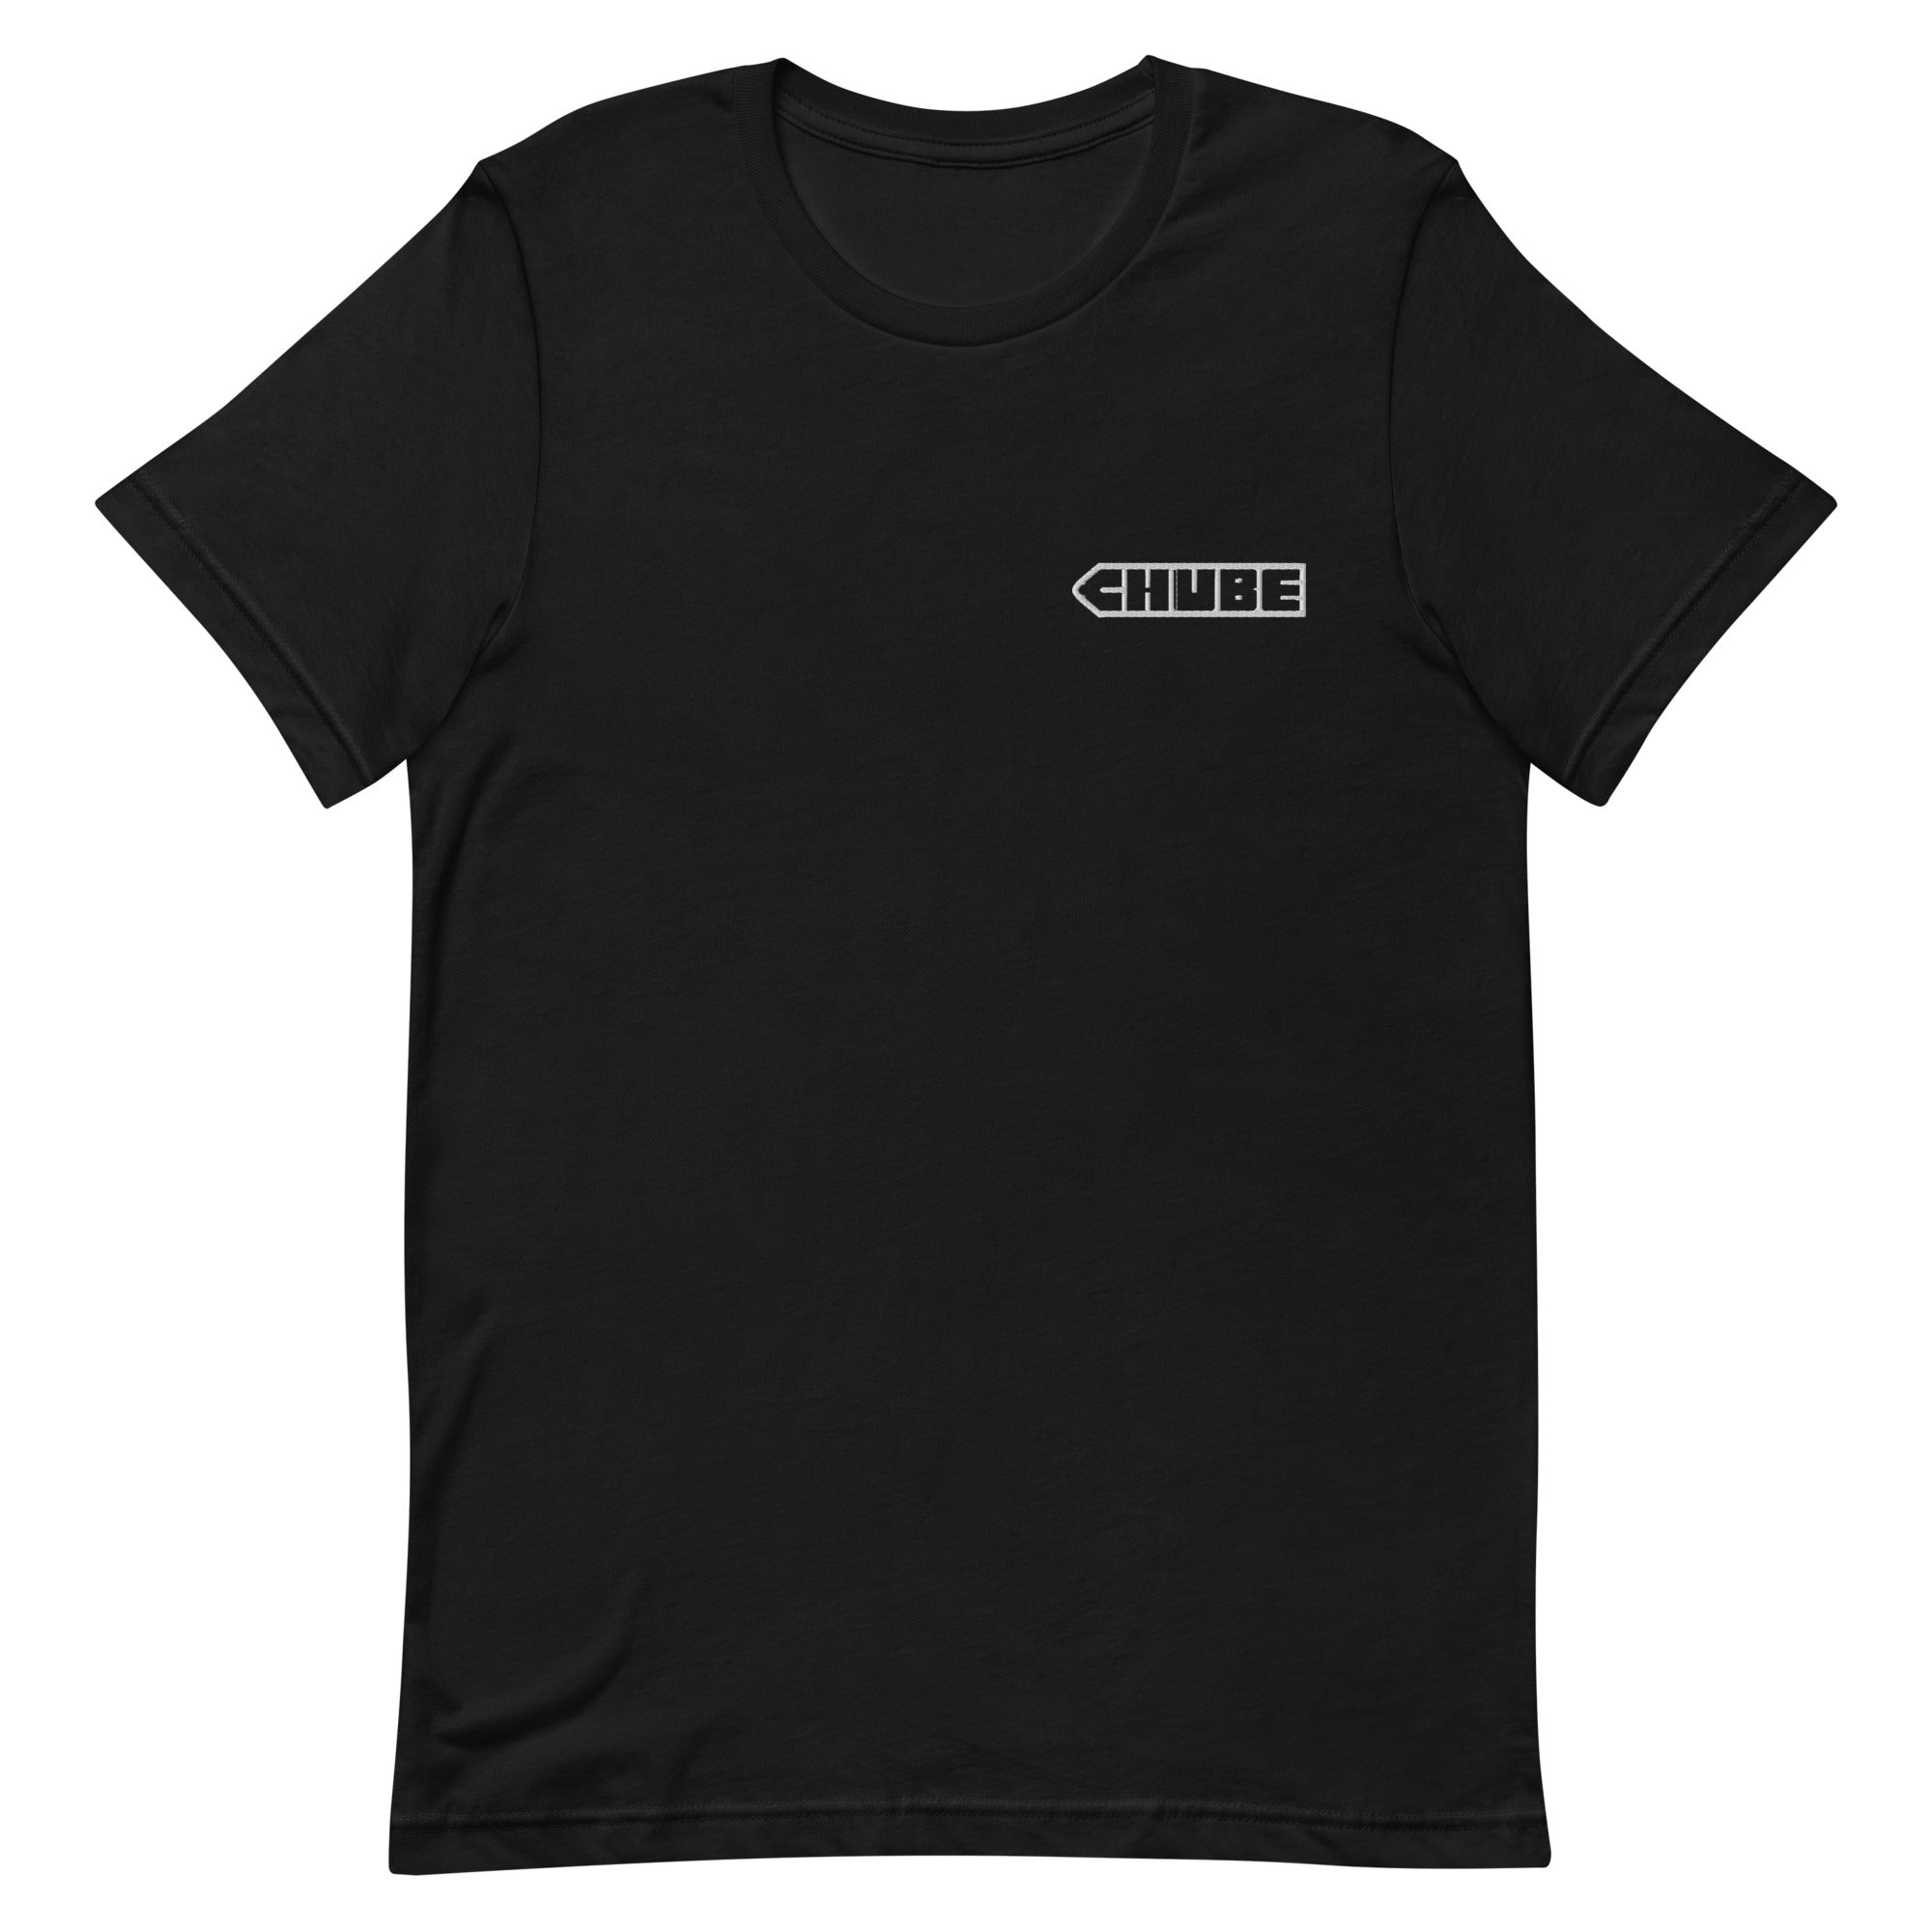 Unisex Embroidered Chube T-Shirt